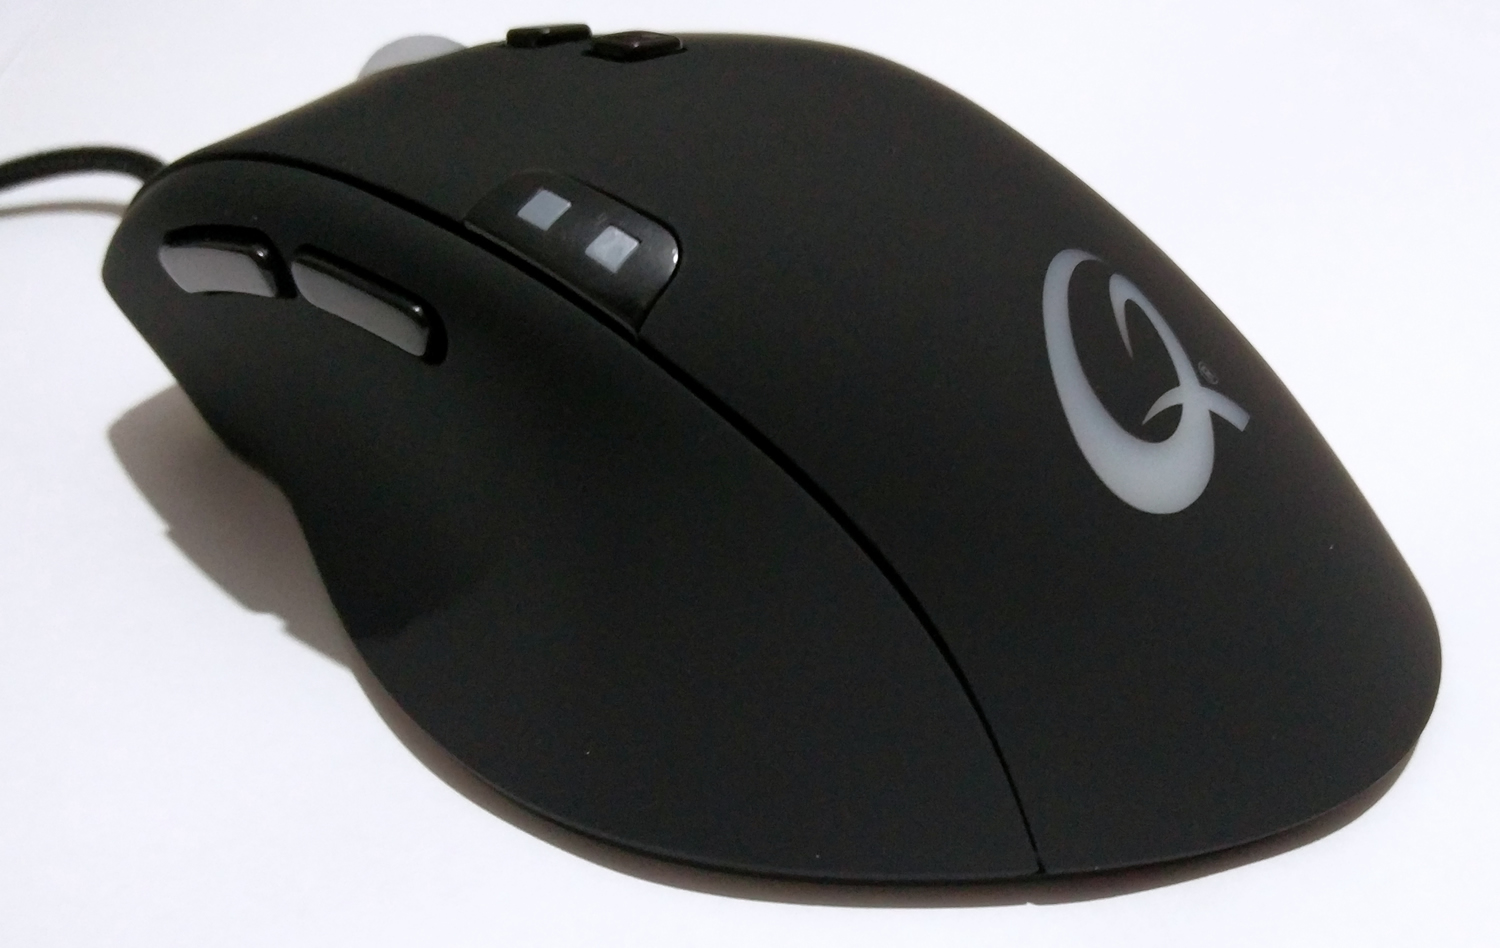 Quick Review: QPAD 5K Gaming Mouse with HeatoN and CT Mousepads